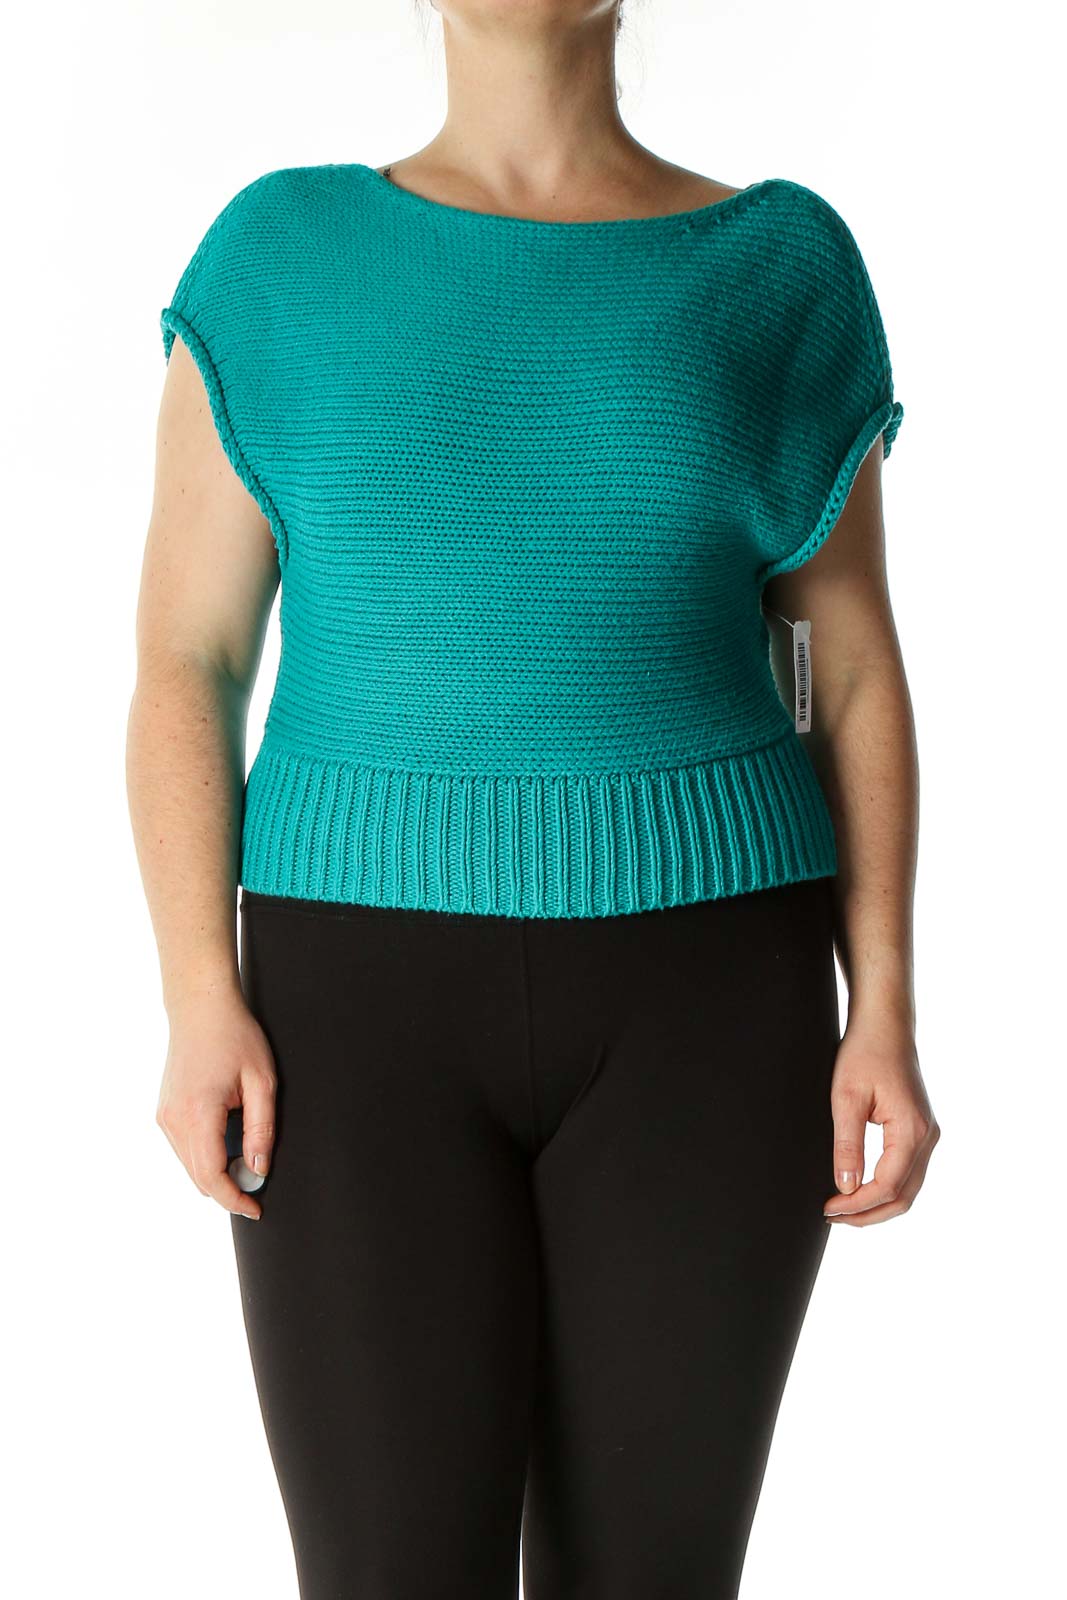 Green Textured Sweater Front